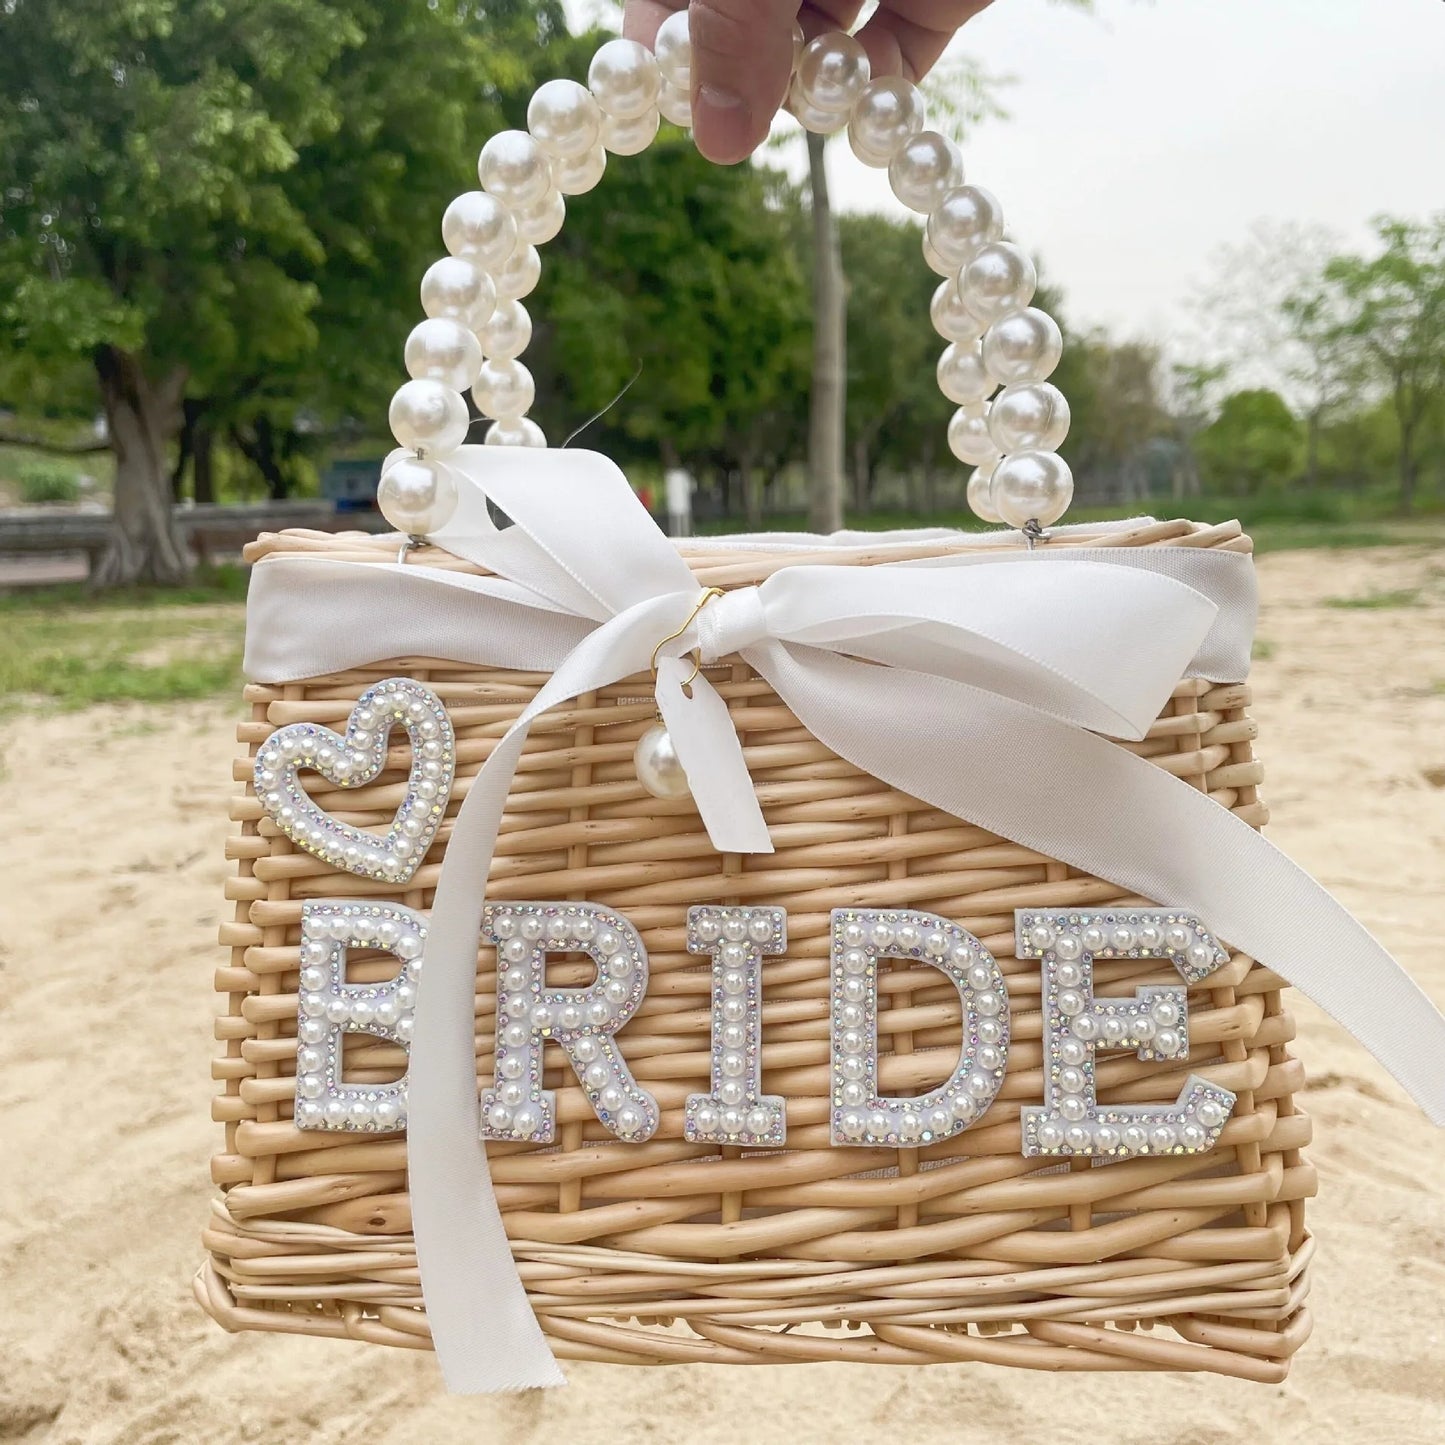 Bride Woven Basket with Pearls